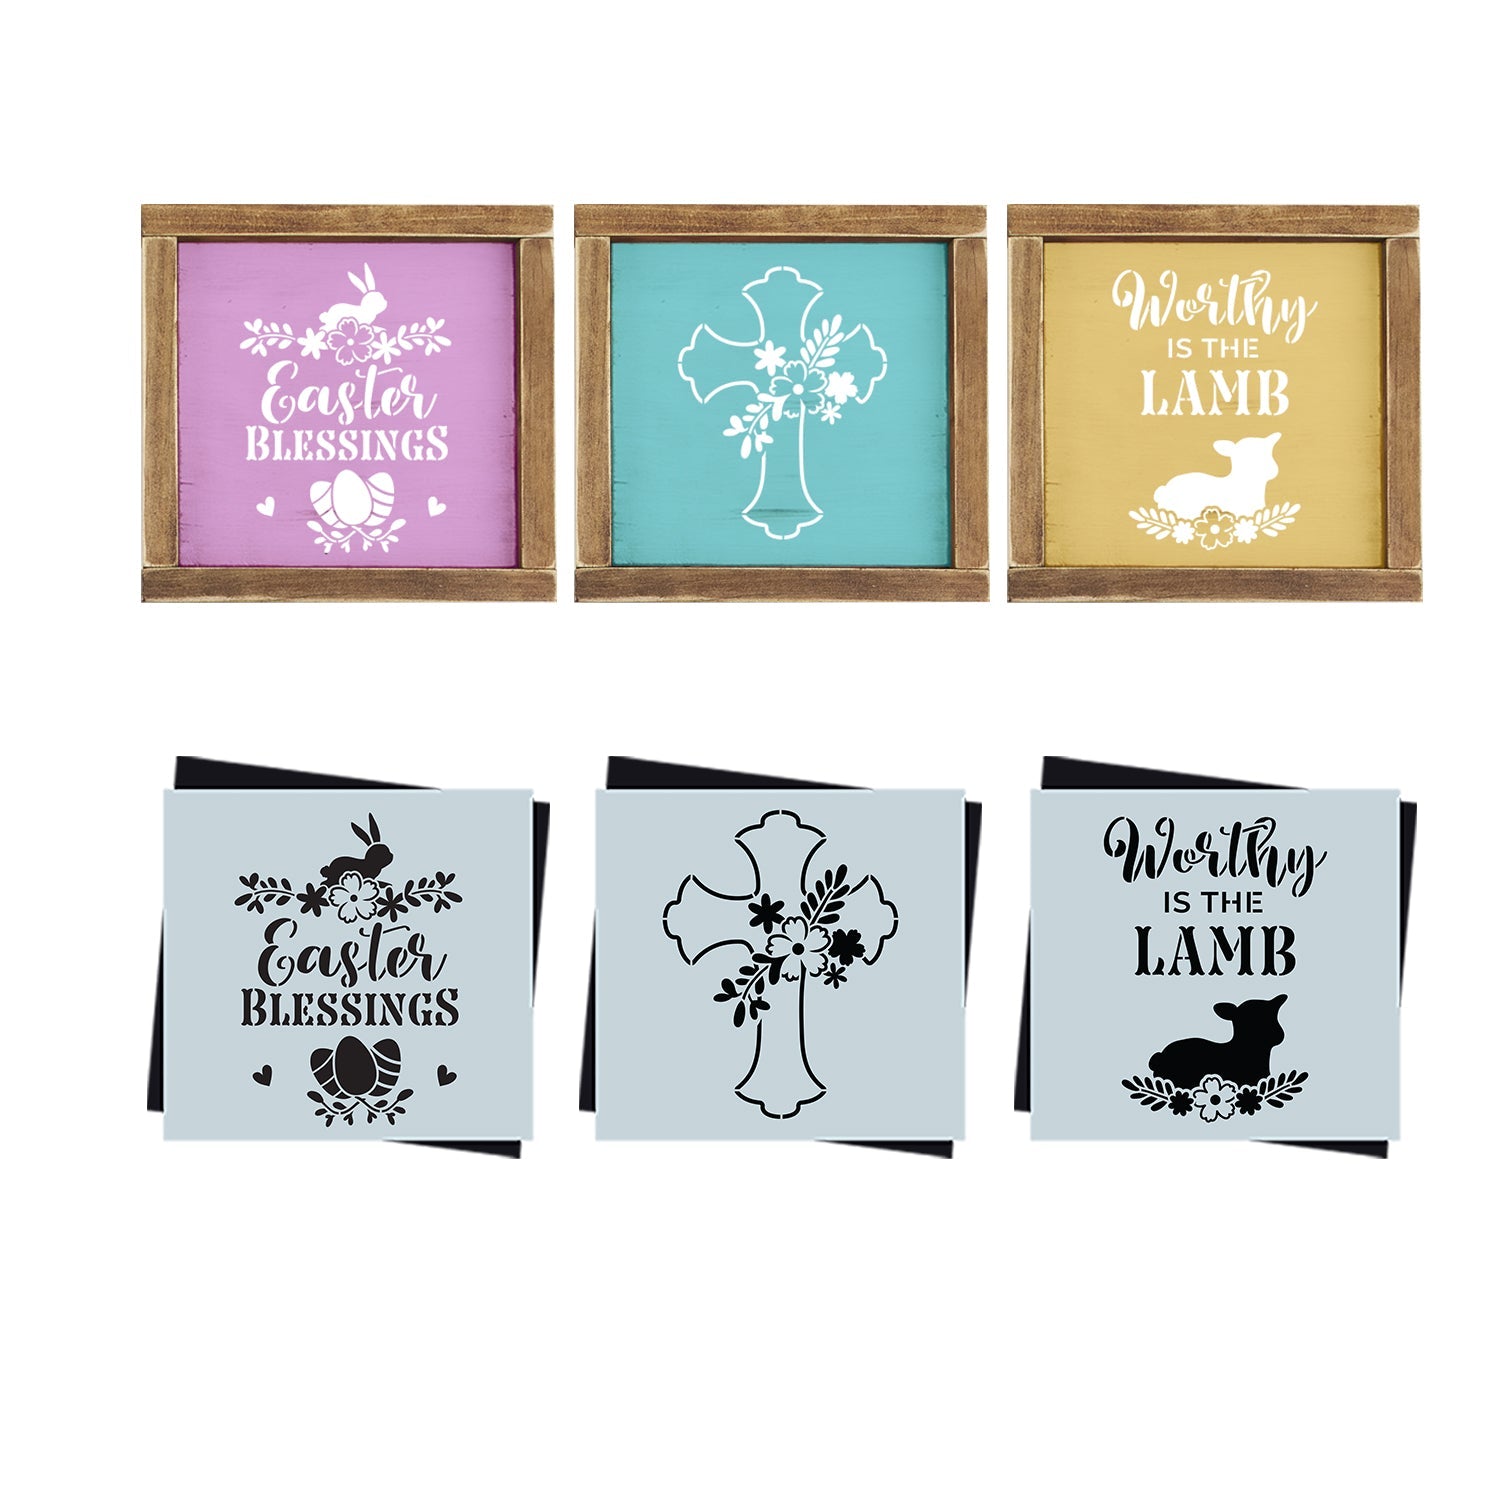 DIY reusable easter wood sign stencils, floral cross silhouette wood sign  stencil, worthy is the lamb with lamb silhouette stencil, easter blessings wood sign stencil